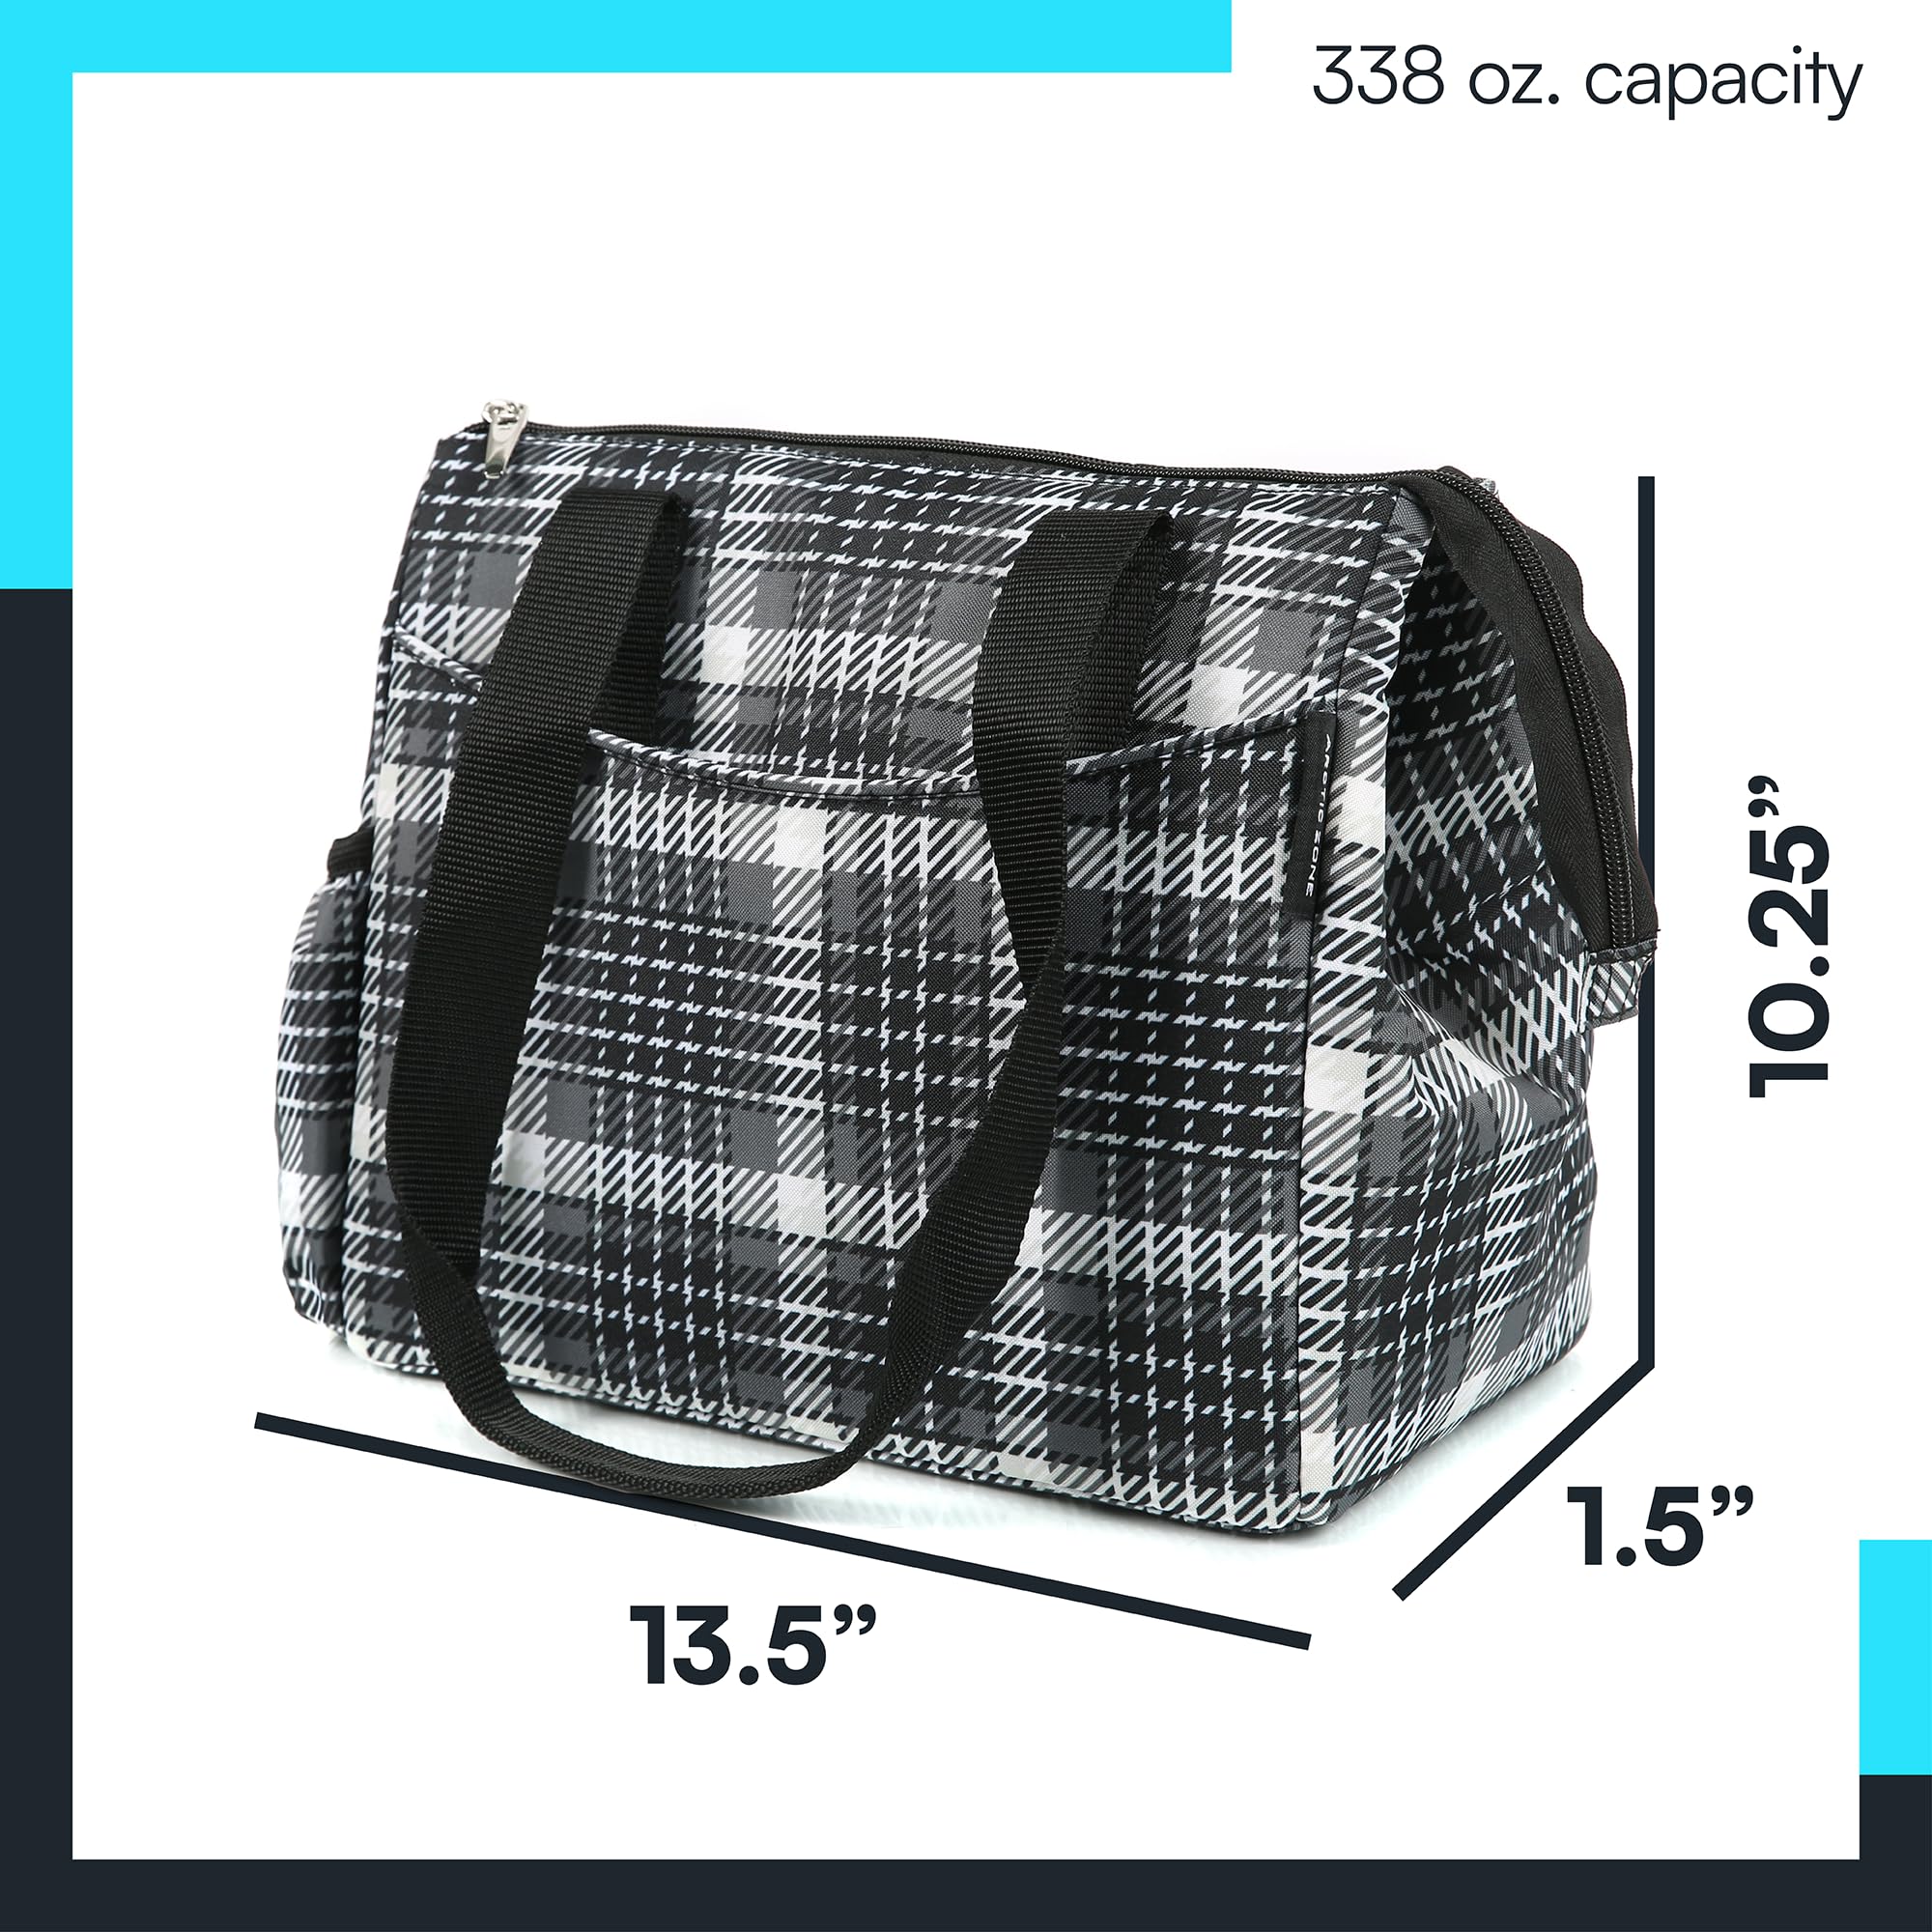 Arctic Zone Georgia Insulated Lunch Tote Bag for Women - Leak Proof Lunch Box Insulated Cooler Tote Bag - Glen Plaid